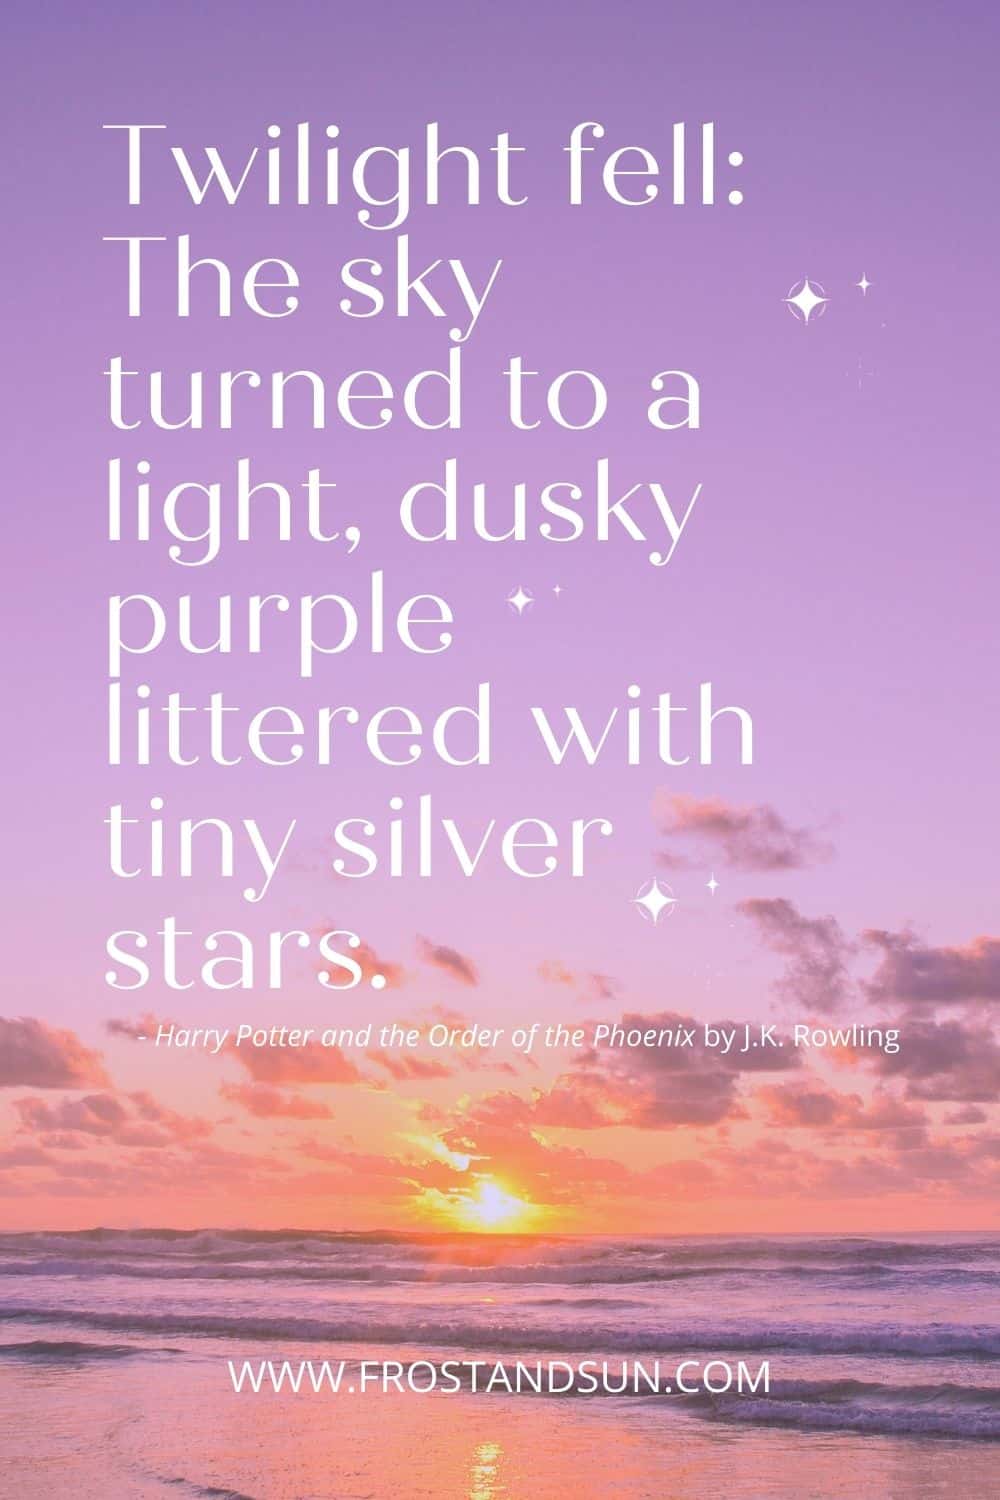 Photo of a purple sky with a Harry Potter quote at the top: "Twilight fell: The sky turned to a light, dusky purple littered with tiny silver stars."